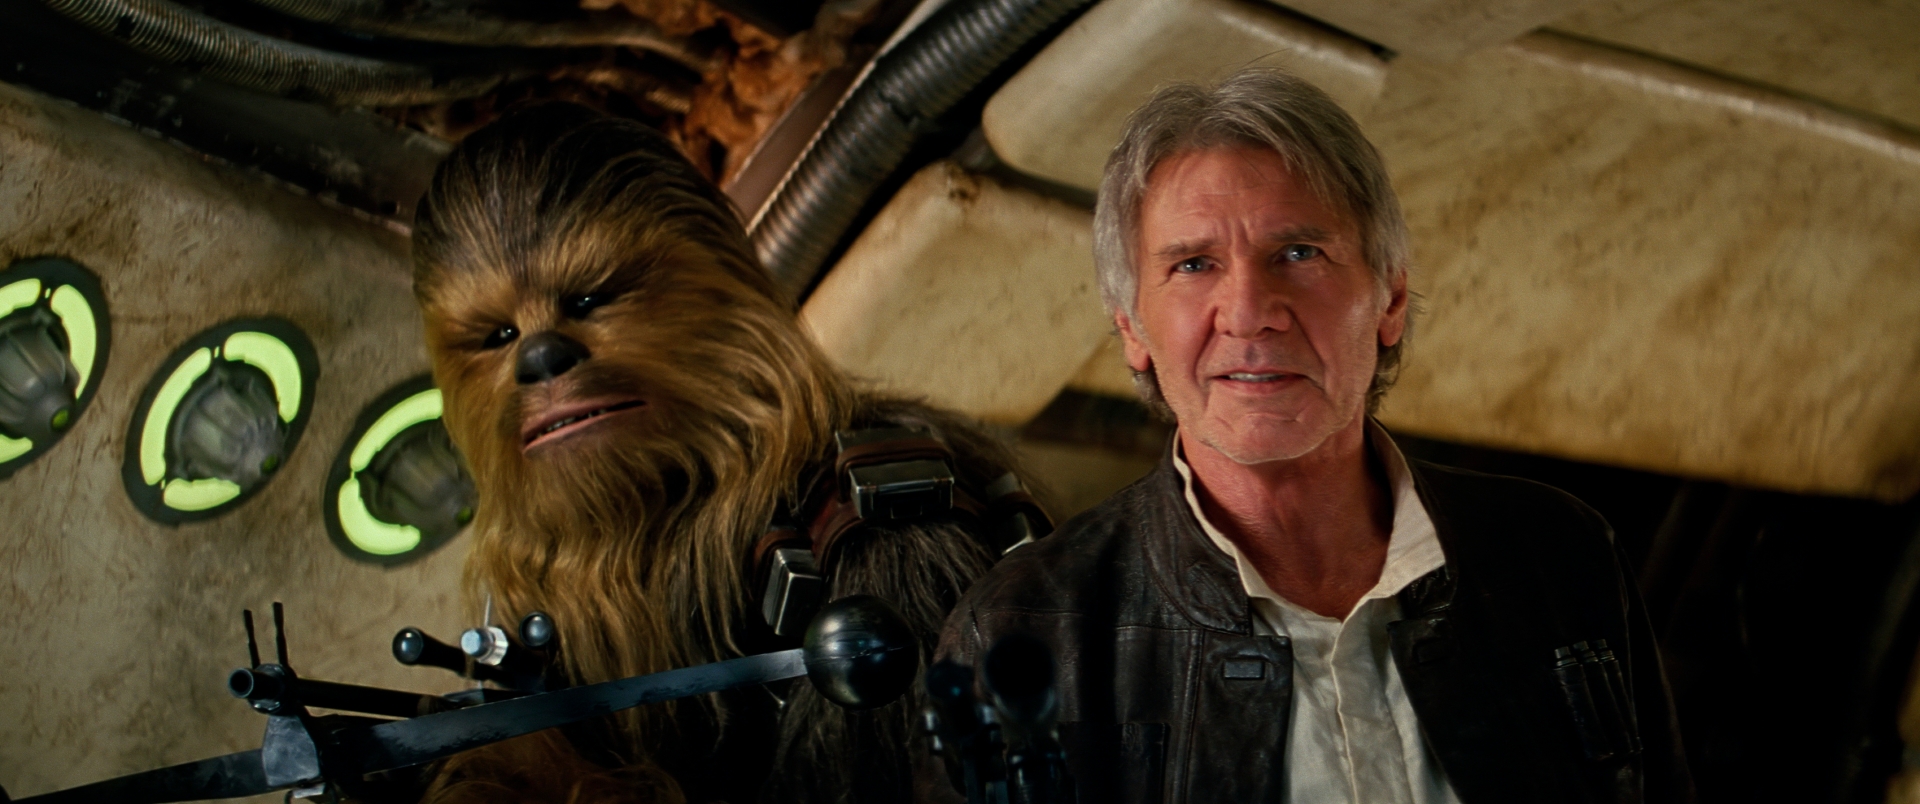 Star Wars: The Force Awakens



L to R: Chewbacca (Peter Mayhew) and Han Solo (Harrison Ford)



Ph: Film Frame



©Lucasfilm 2015starwars3